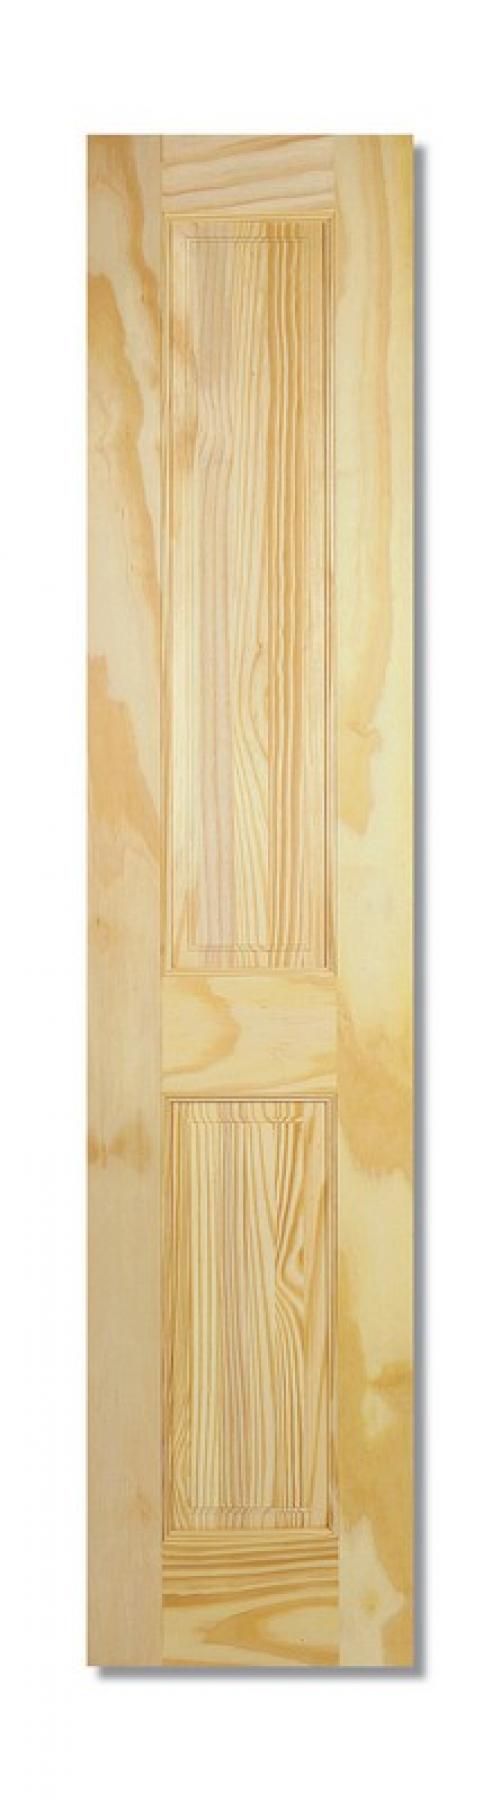 Image for 78X33 4 PANEL CLEAR PINE